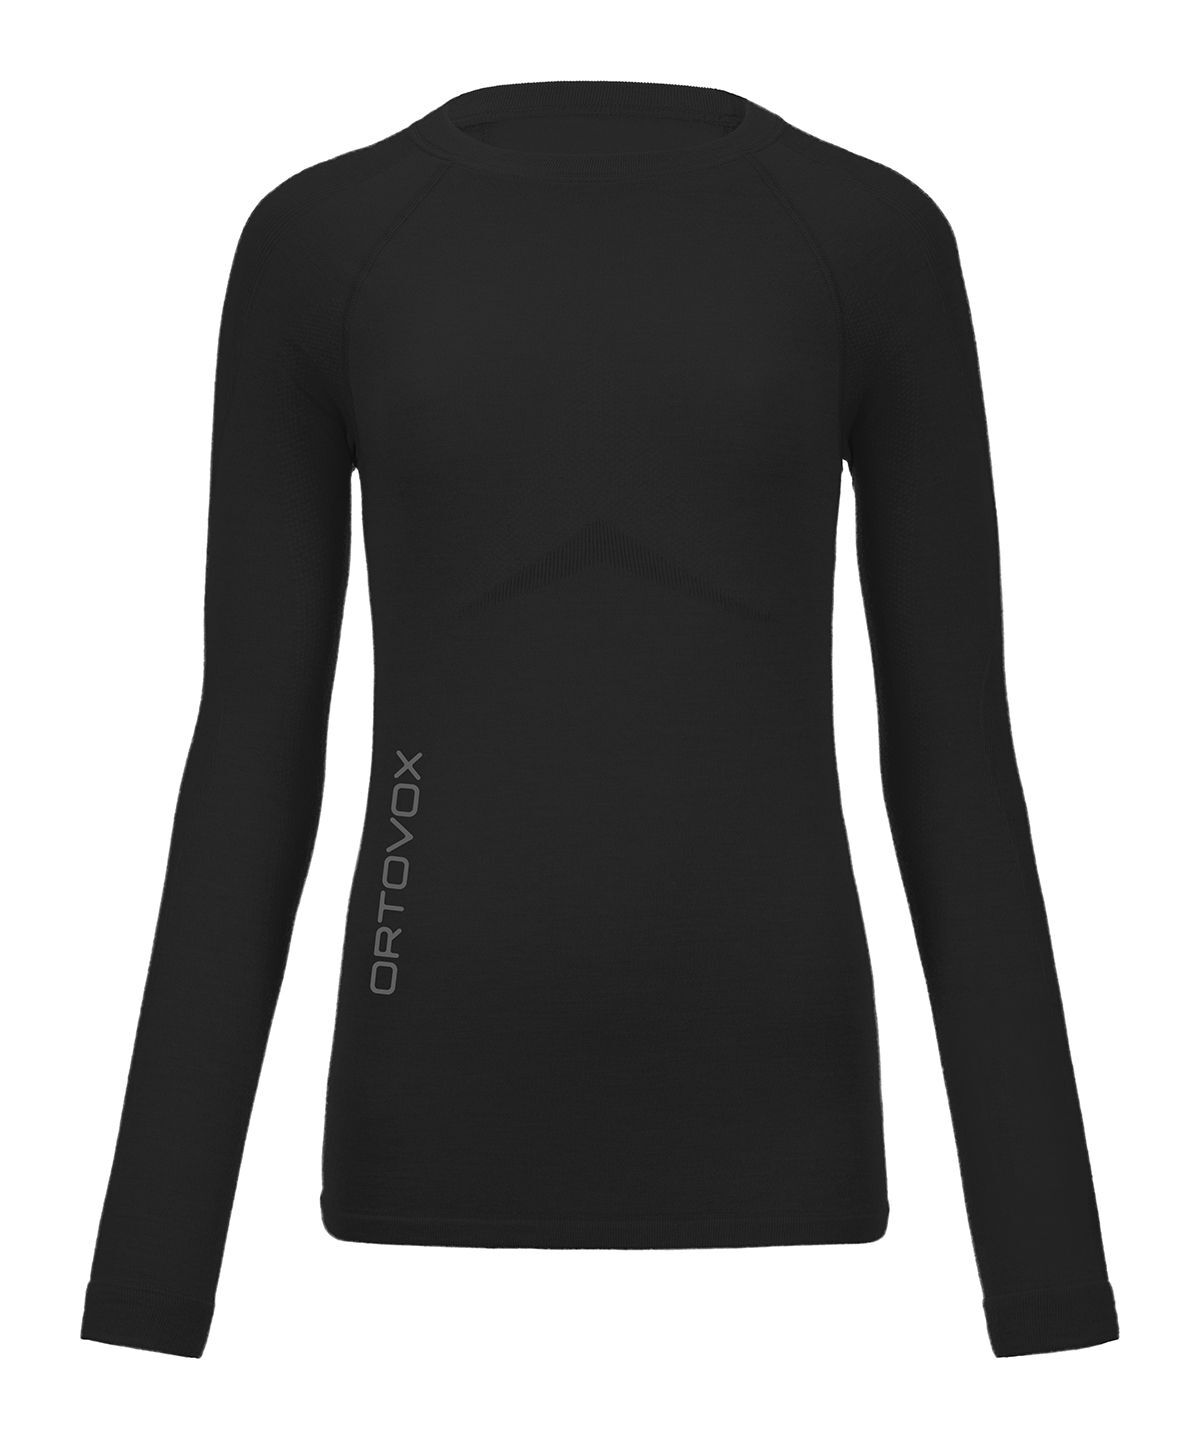 Ortovox 230 Competition Long Sleeve - Ropa interior merino - Mujer